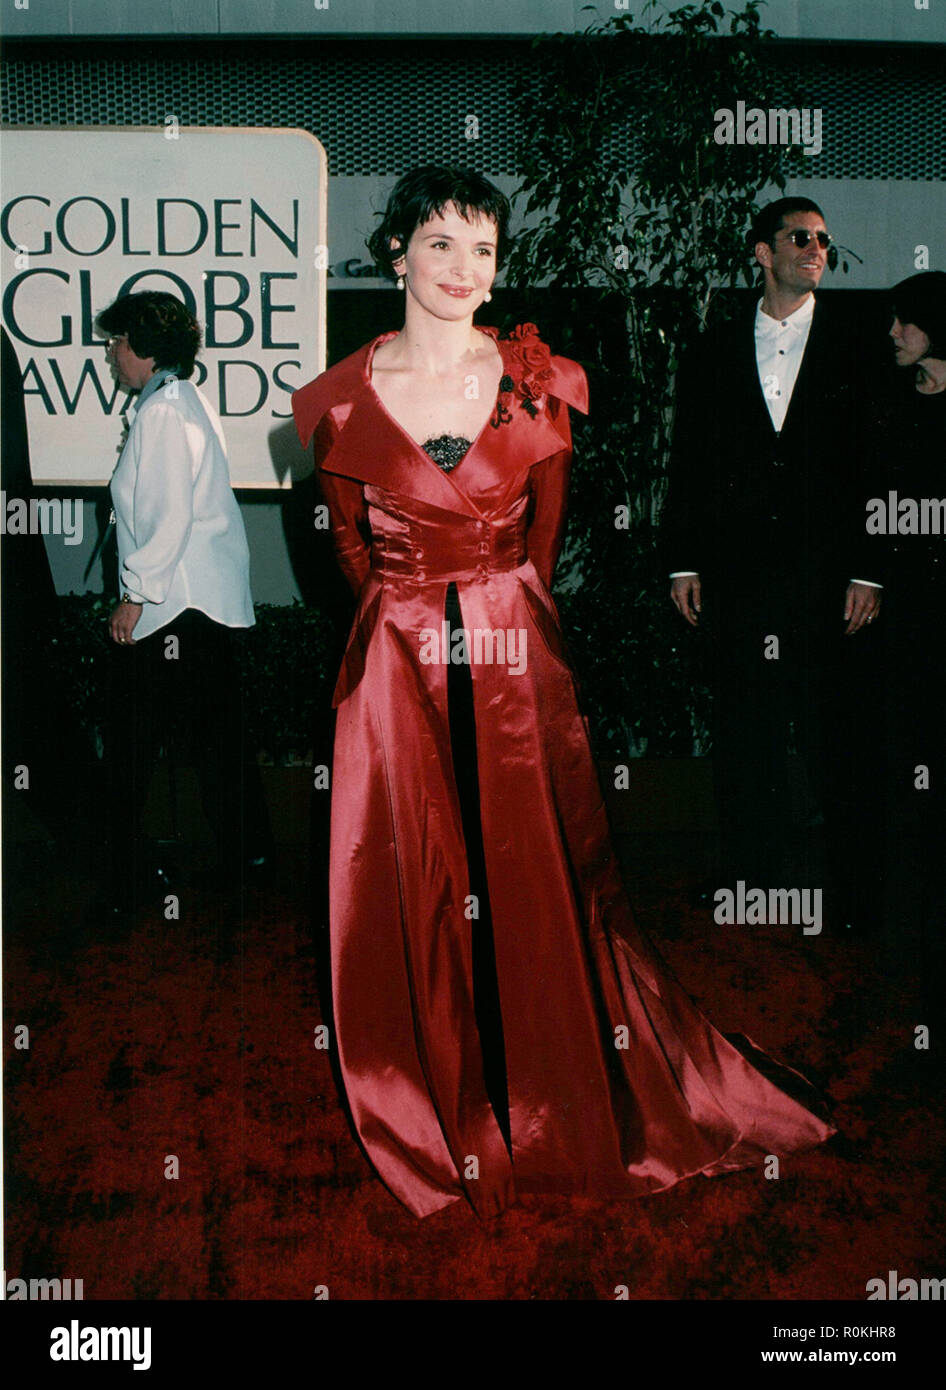 Juliette Binoche   ÉÉ.. Event in Hollywood Life - California, USA, Film Industry, Celebrities, Photography, Bestof, Arts Culture and Entertainment, Topix Celebrities fashion, Best of, Hollywood Life,  Red Carpet and backstage, movie celebrities, TV celebrities, Music celebrities, Topix, Bestof, Arts Culture and Entertainment, vertical, one person, Photography,   #Celebrity #Hollywood #RedCarpet #Actor #Actress #famousCelebrity #HollywoodEvent #TsuniUSA #CelebrityPhotography, Fashion inquiry tsuni@Gamma-USA.com , Credit Tsuni / USA,   Fashion, From the Year 1993 to 1999, Stock Photo